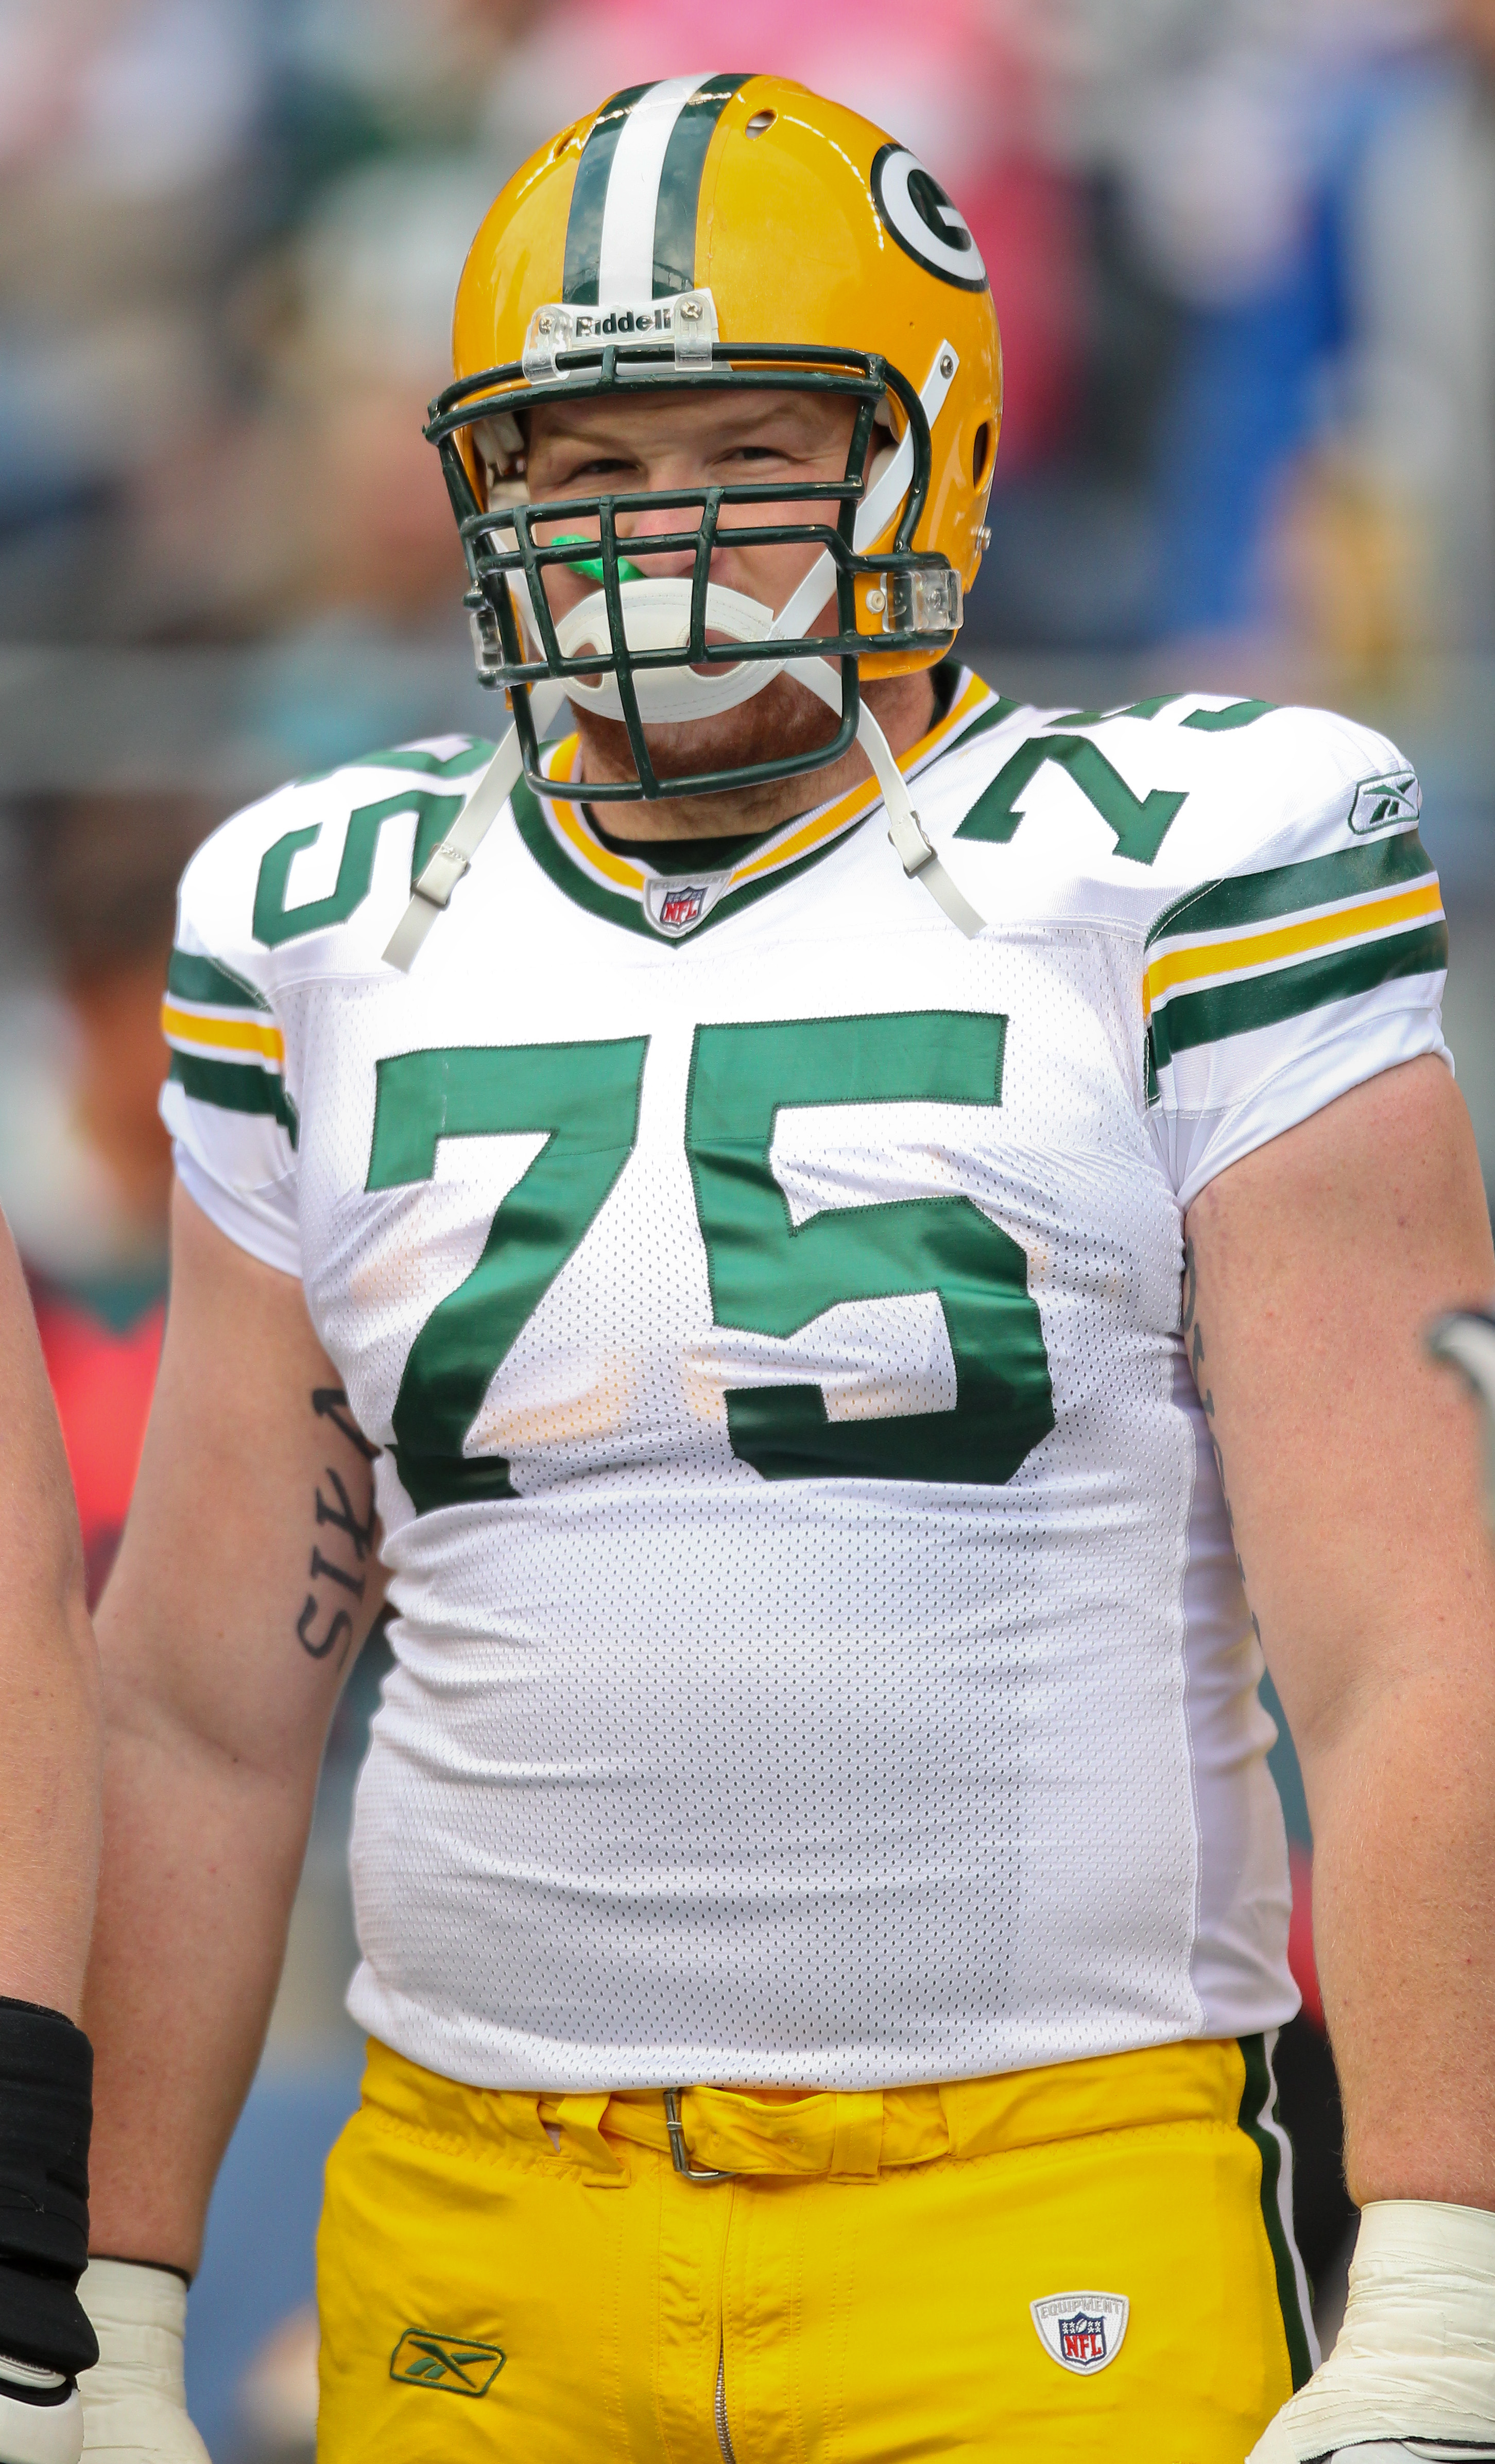 SEATTLE - AUGUST 21:  Guard Bryan Bulaga #75 of the Green Bay Packers looks on prior to the preseason game against the Seattle Seahawks at Qwest Field on August 21, 2010 in Seattle, Washington. (Photo by Otto Greule Jr/Getty Images)